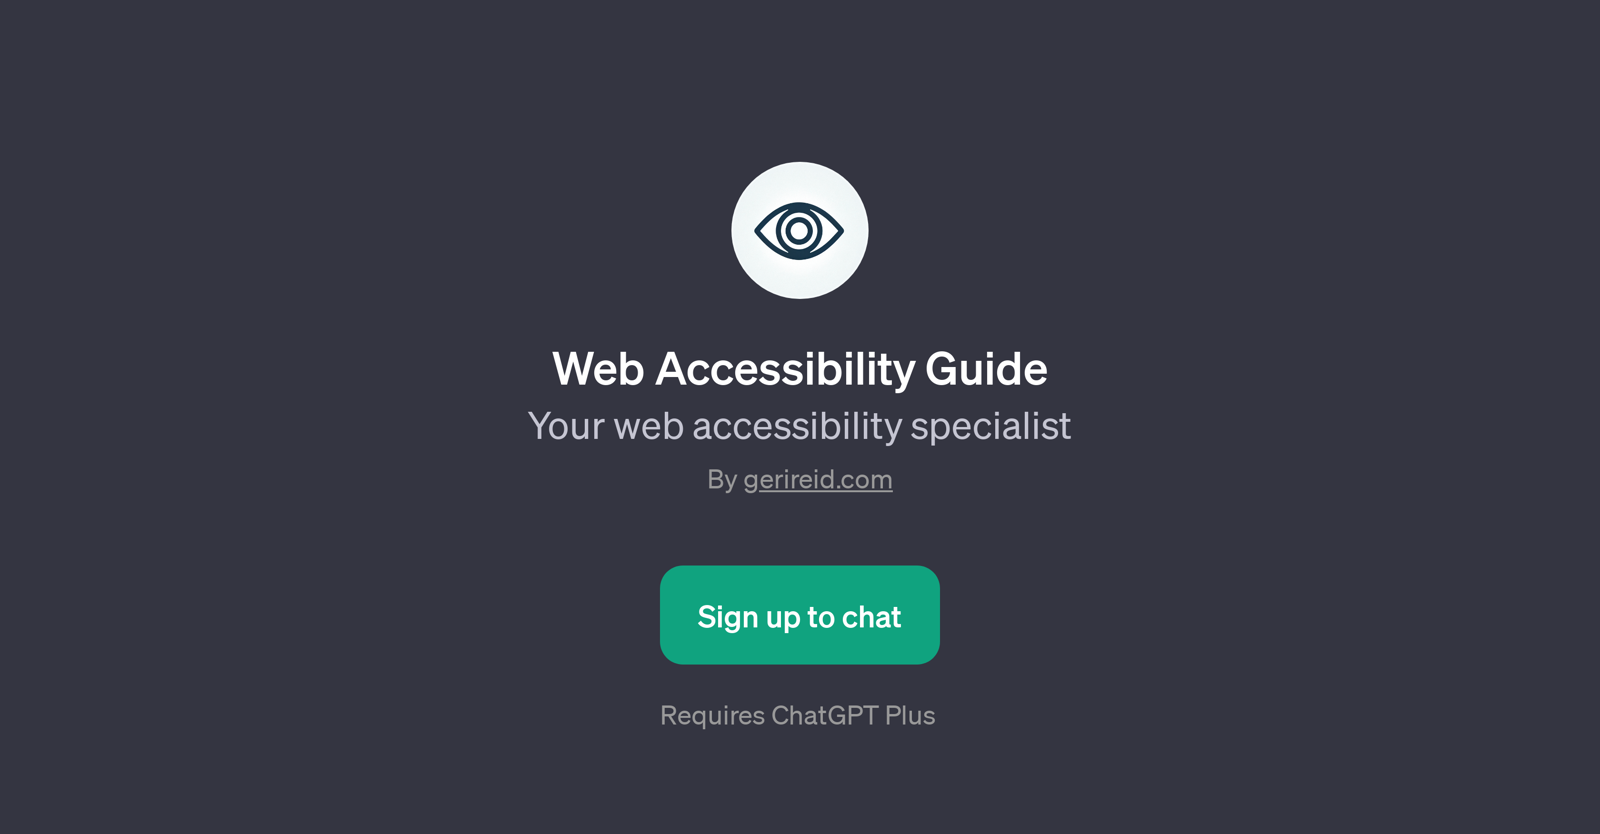 Web Accessibility Guide website